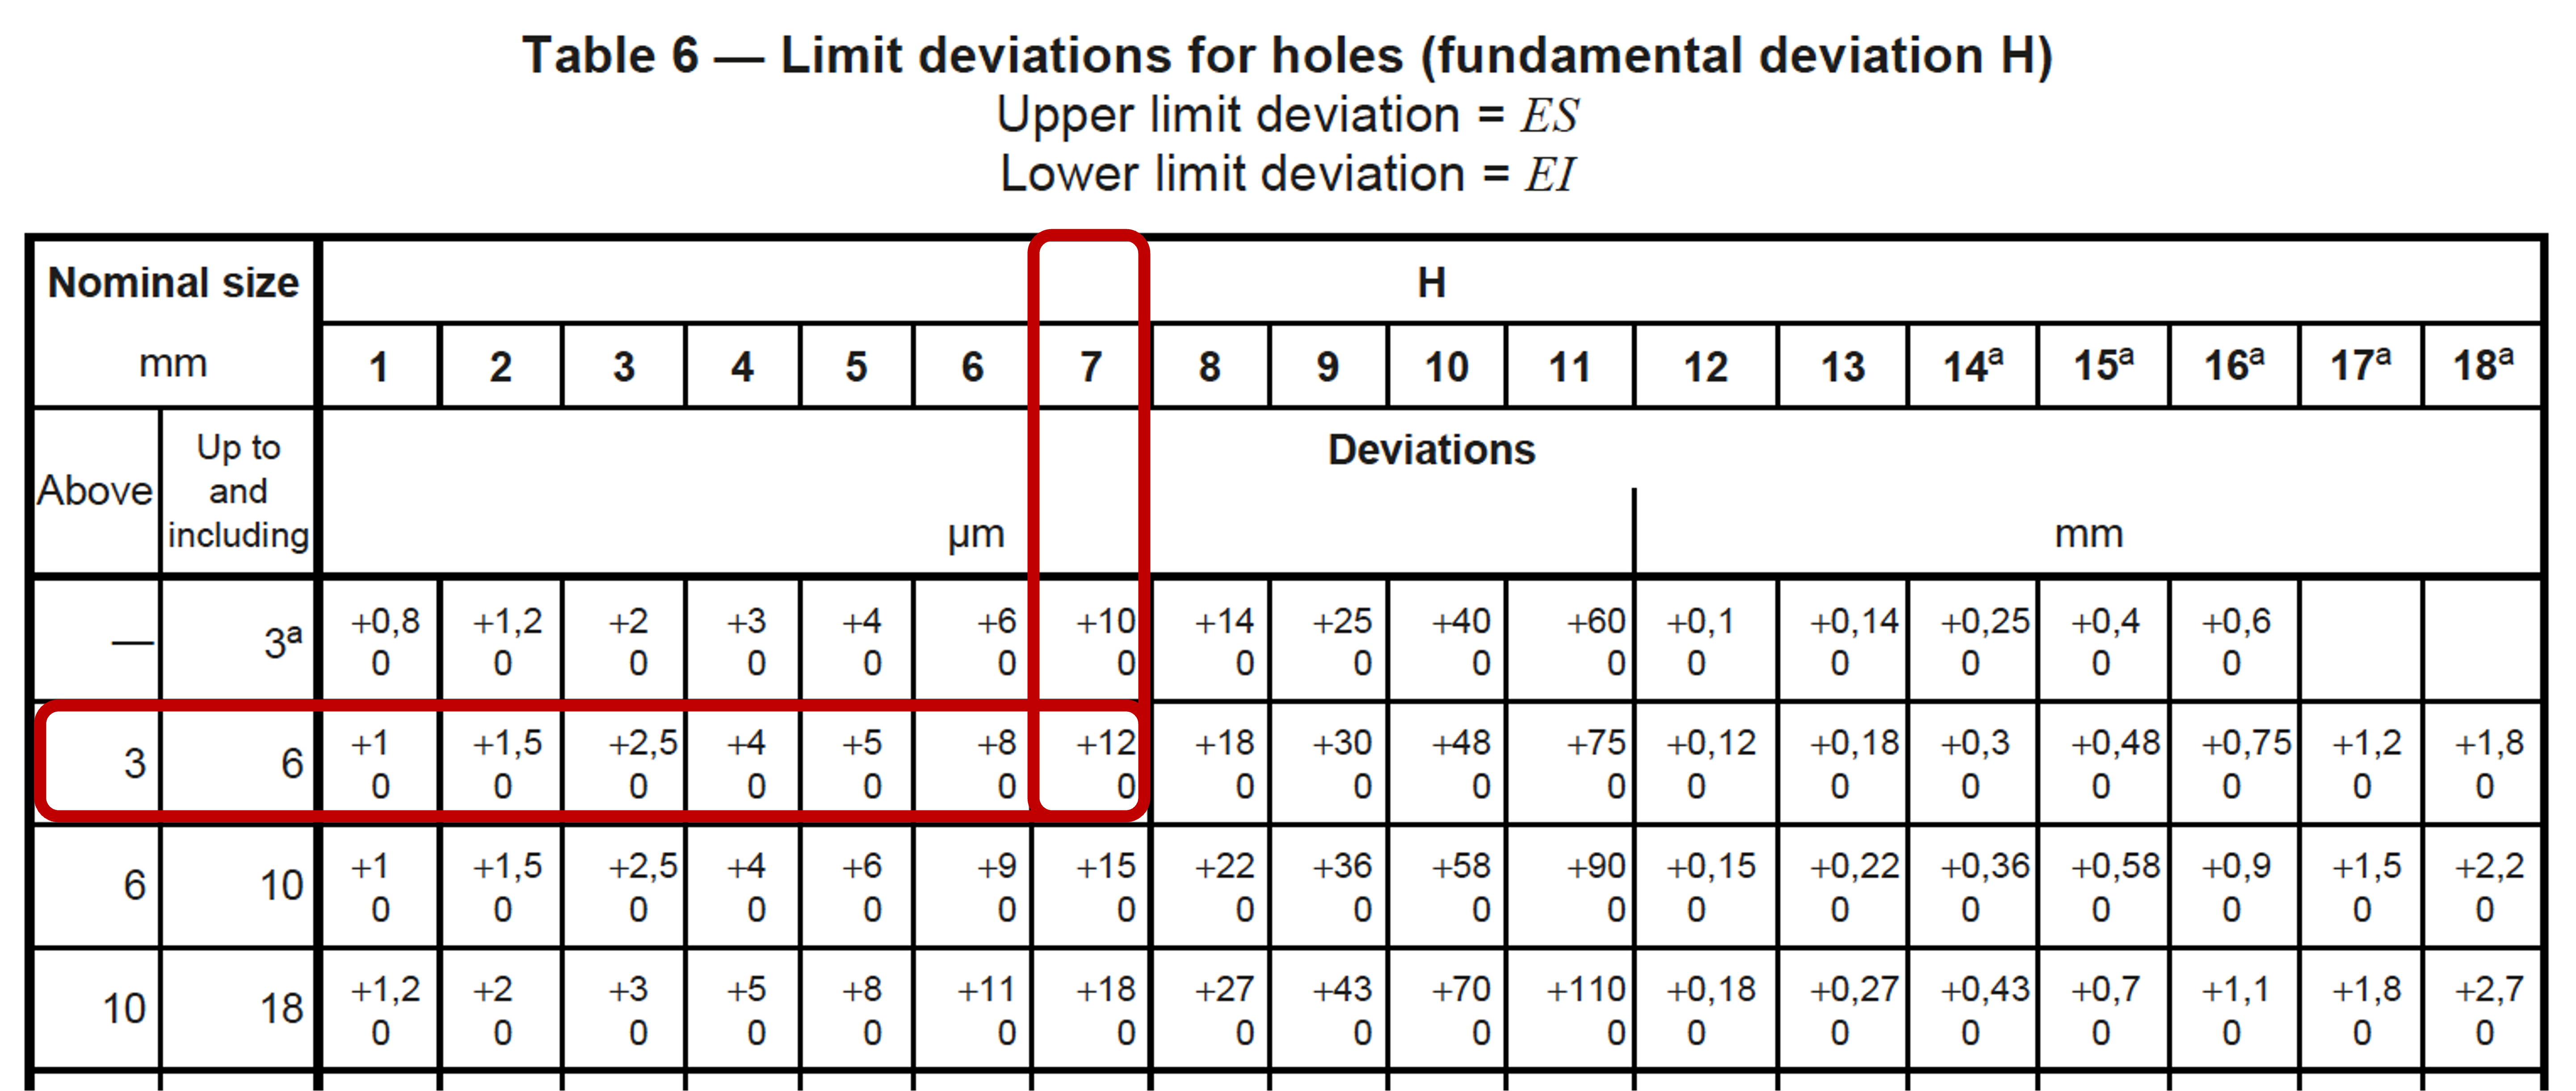 Obtaining the tolerance limits from the limits deviation table.